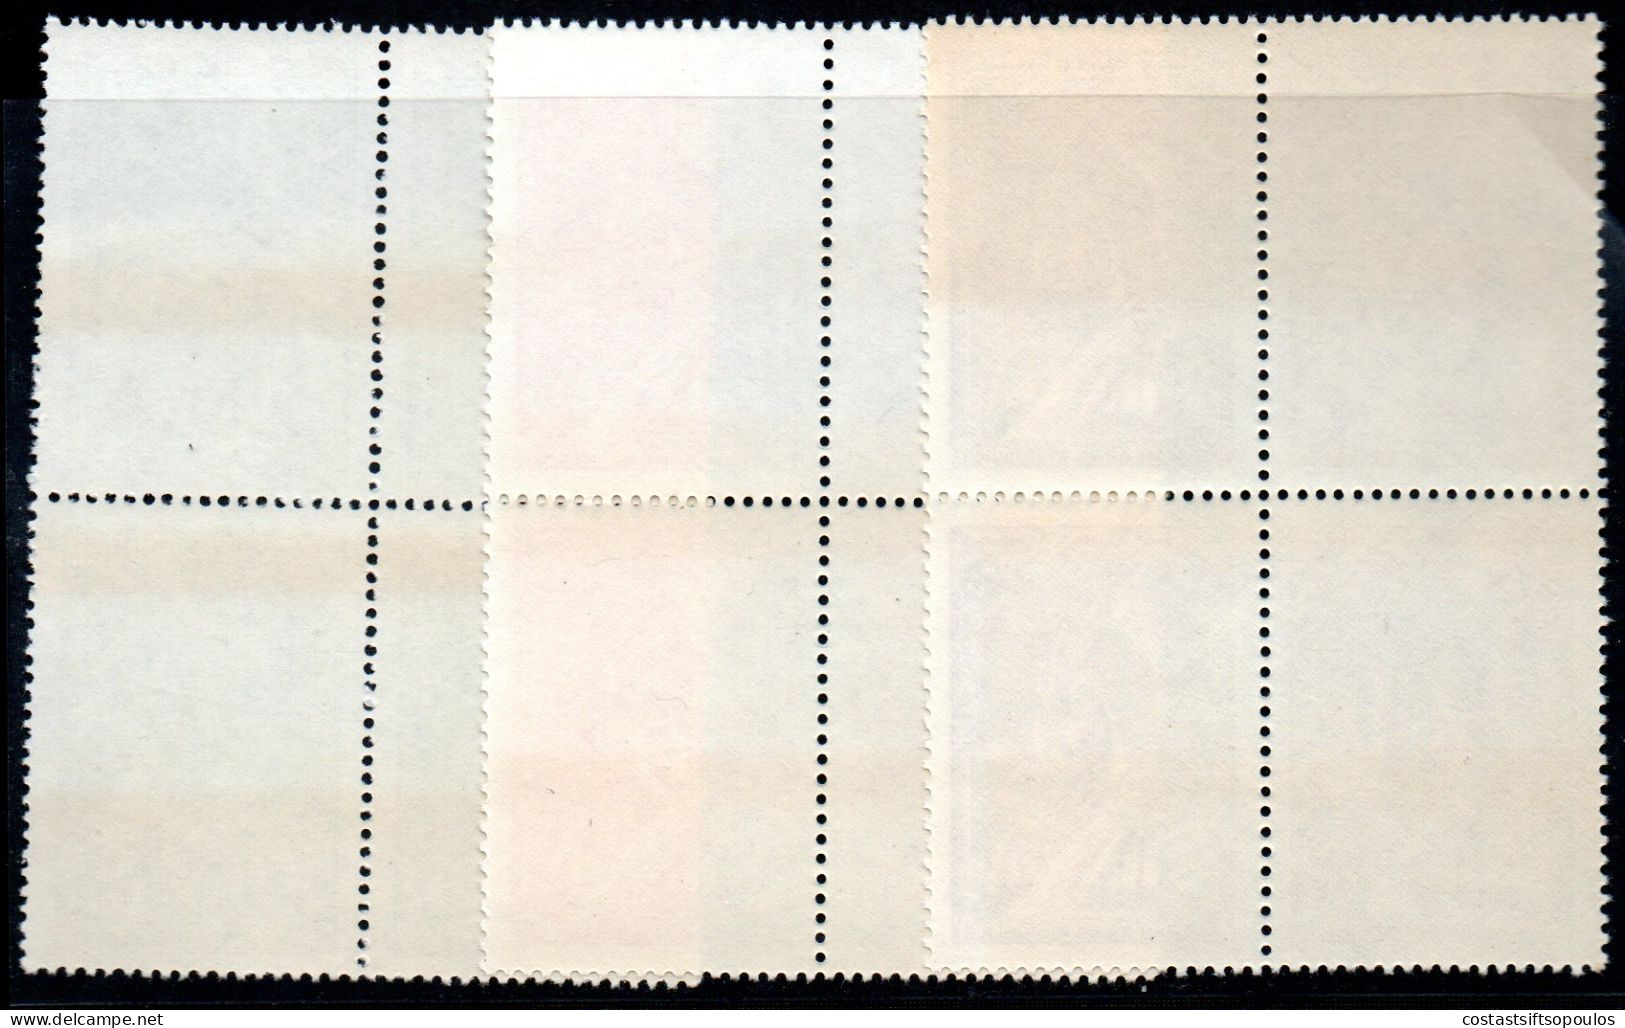 3021.1970 COMPLETE IN MNH BLOCKS OF 4, MANY BICOLOURED GUM AS IN SCAN. - Syrien